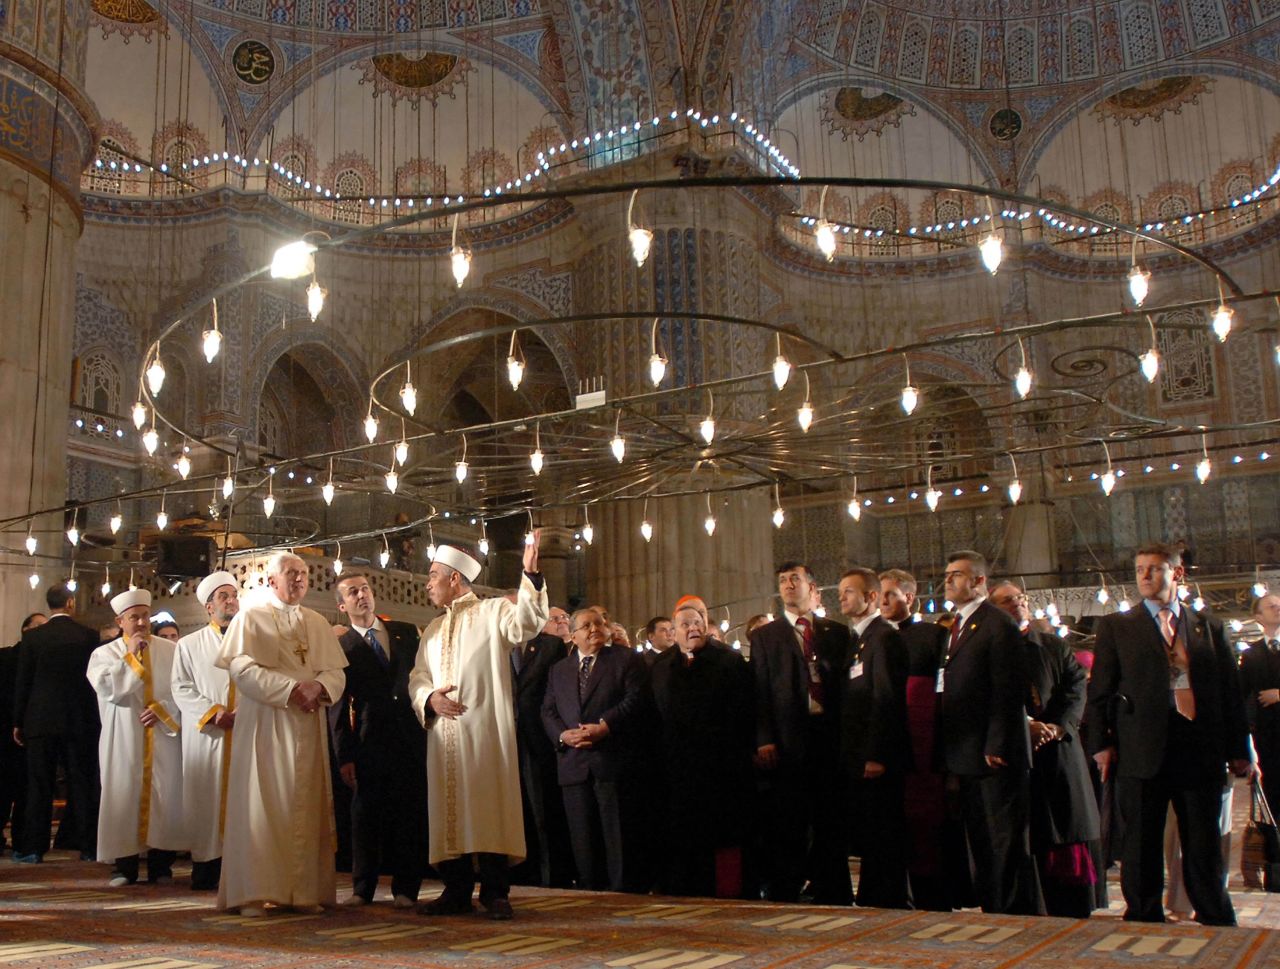 Benedict visits Istanbul's Sultan Ahmet Mosque, aka the Blue Mosque, in November 2006.